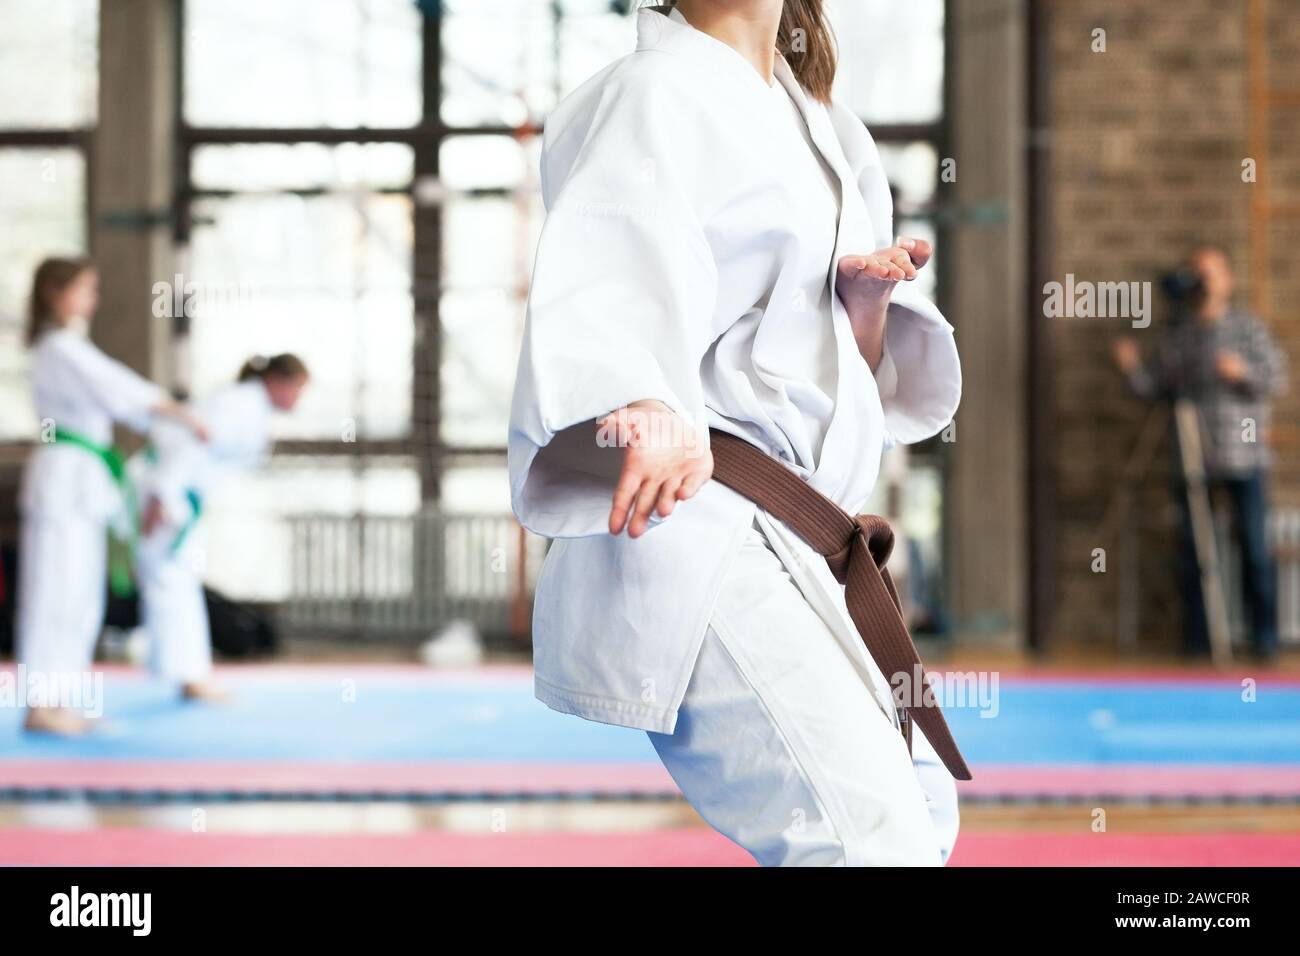 Karate brown belt practitioner body position during competition Stock Photo